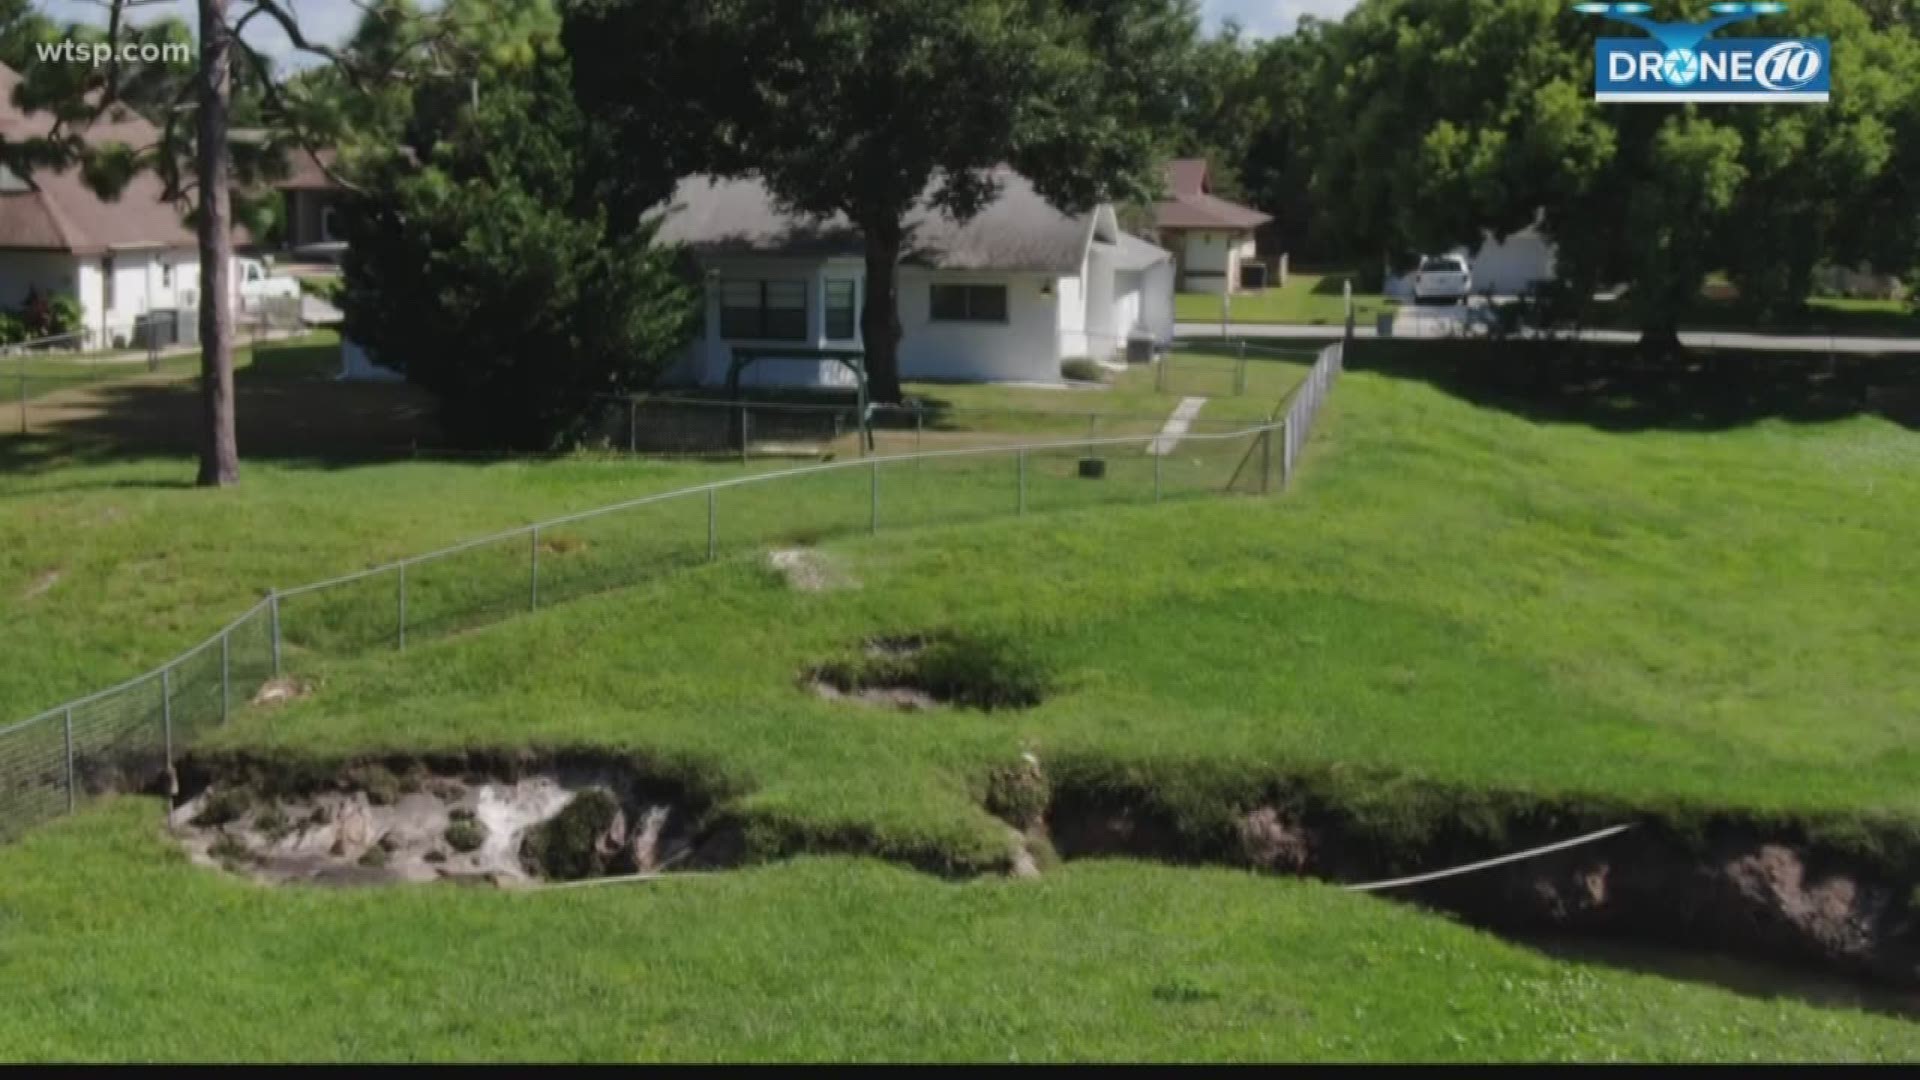 They are detecting sinkhole activity in the area. https://bit.ly/2Mhcgvw